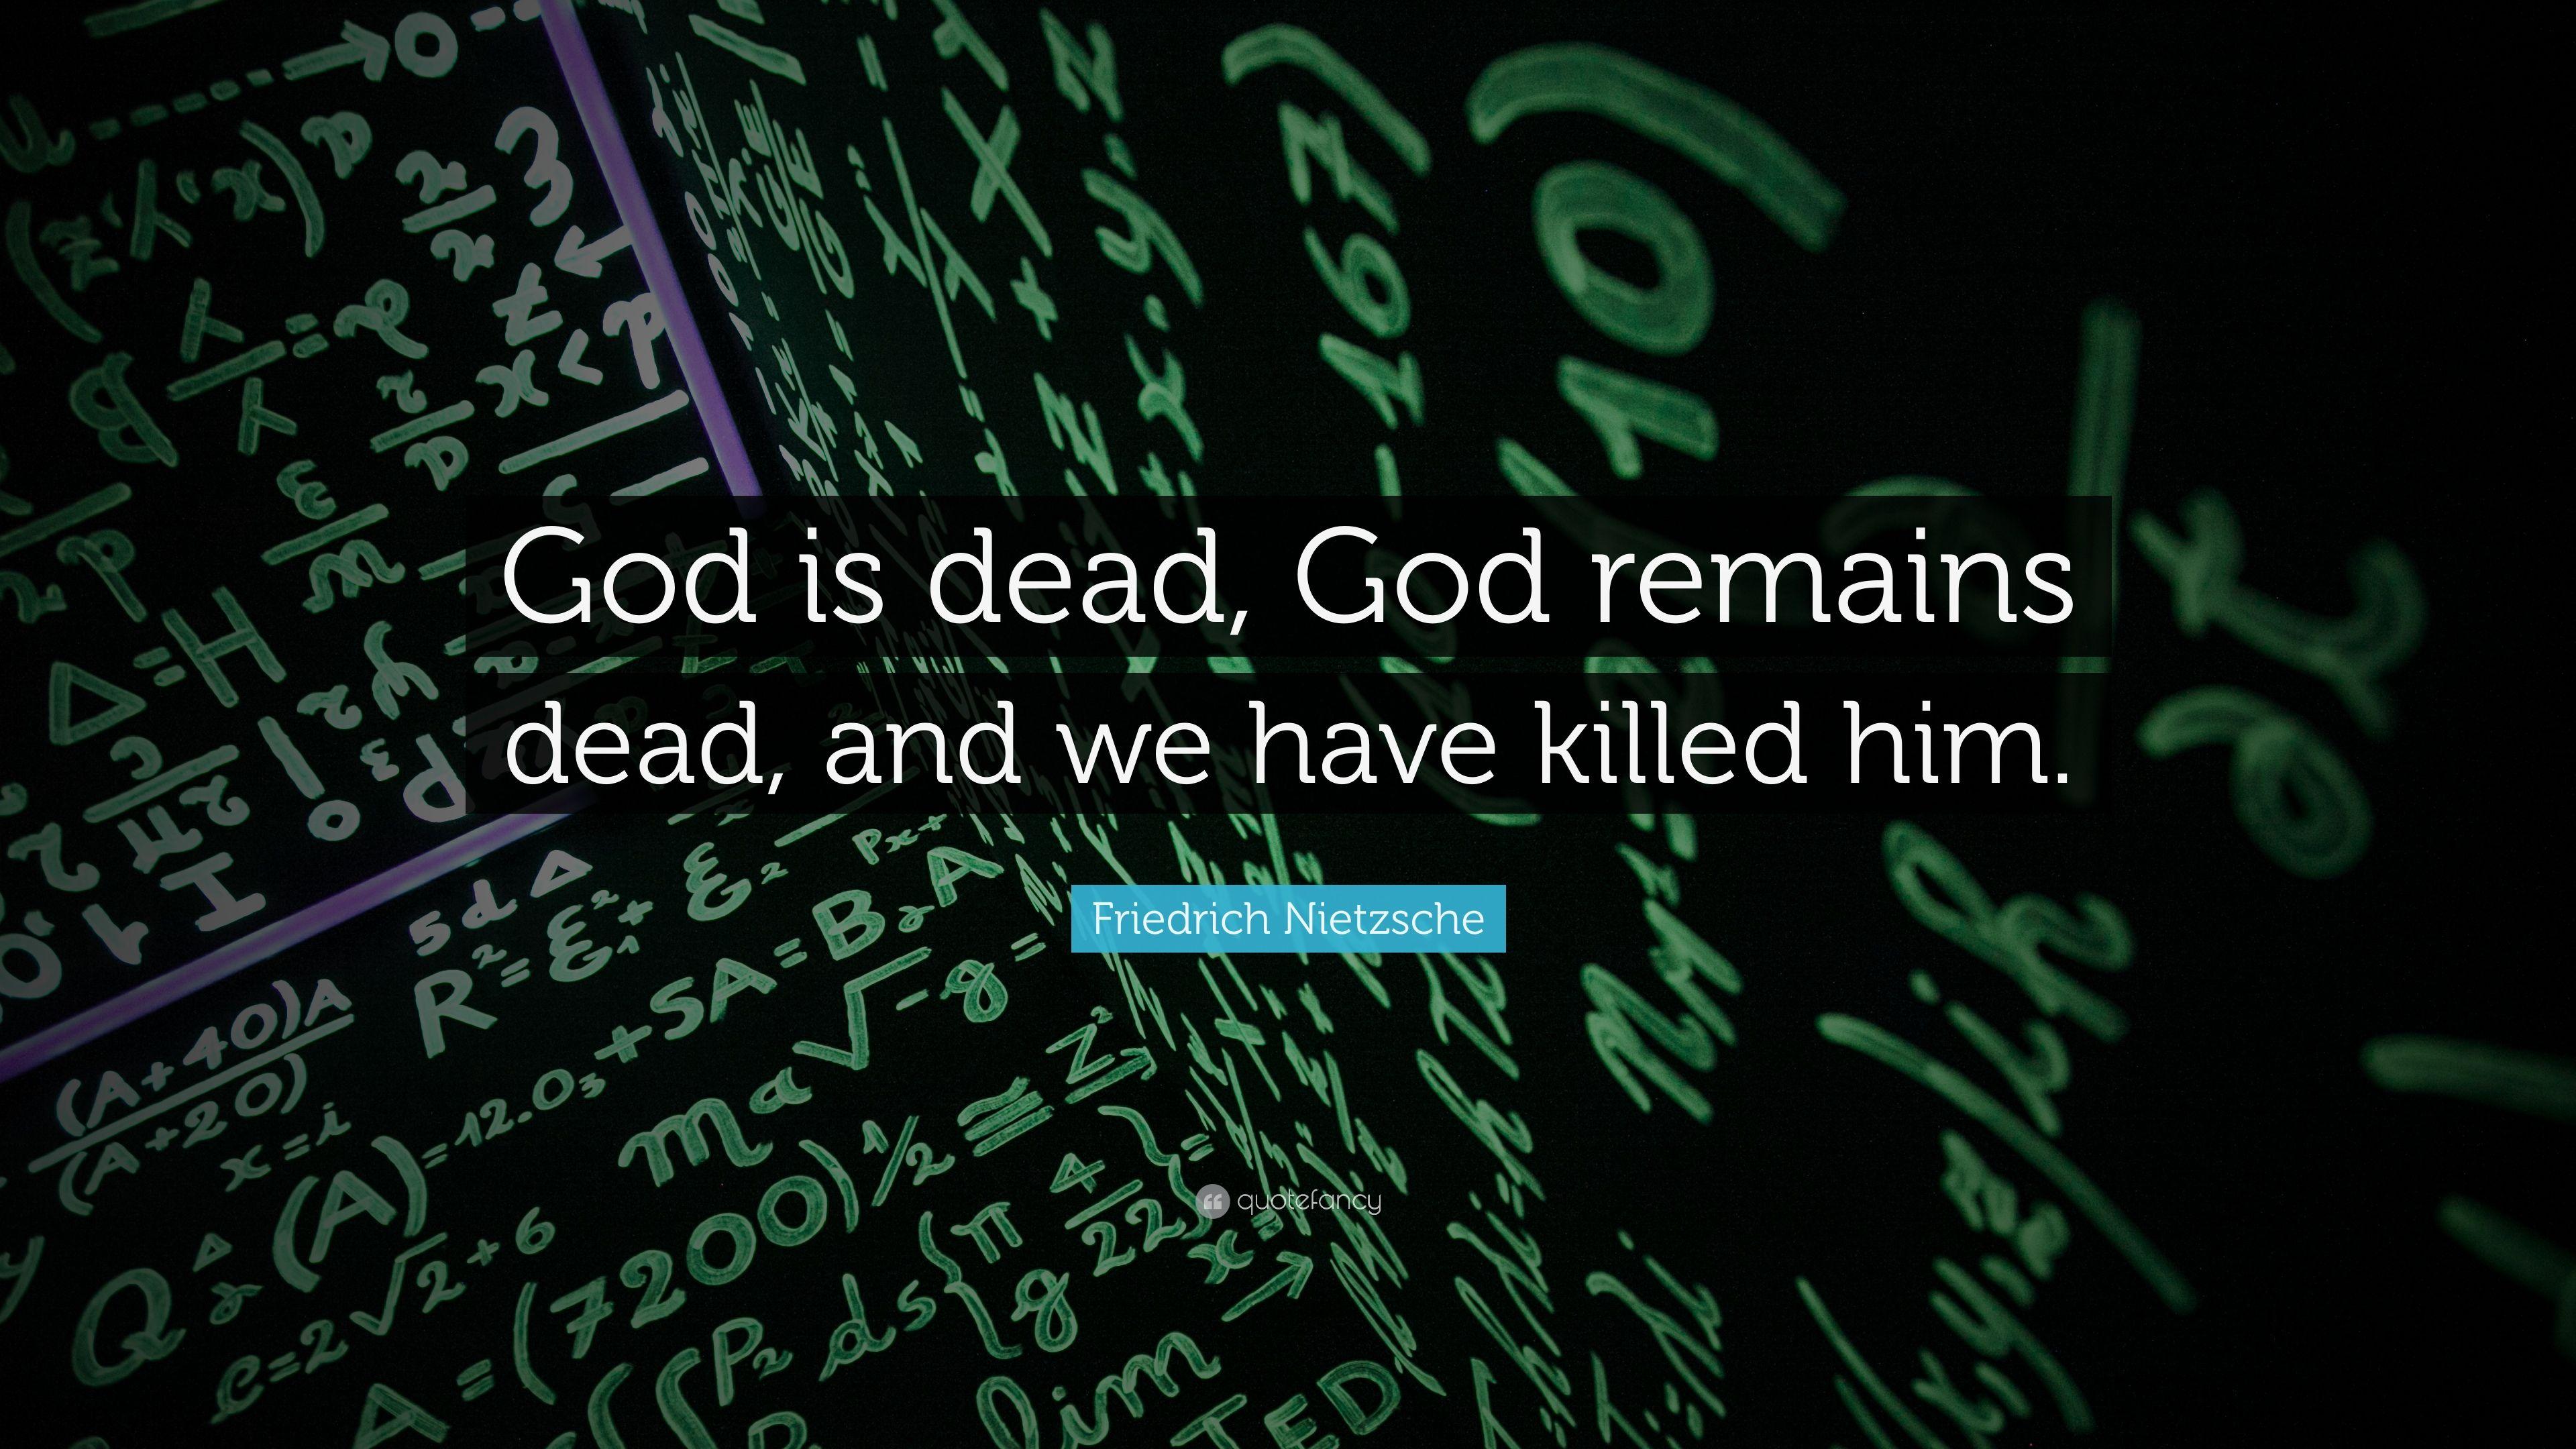 Friedrich Nietzsche Quote: “God is dead, God remains dead, and we